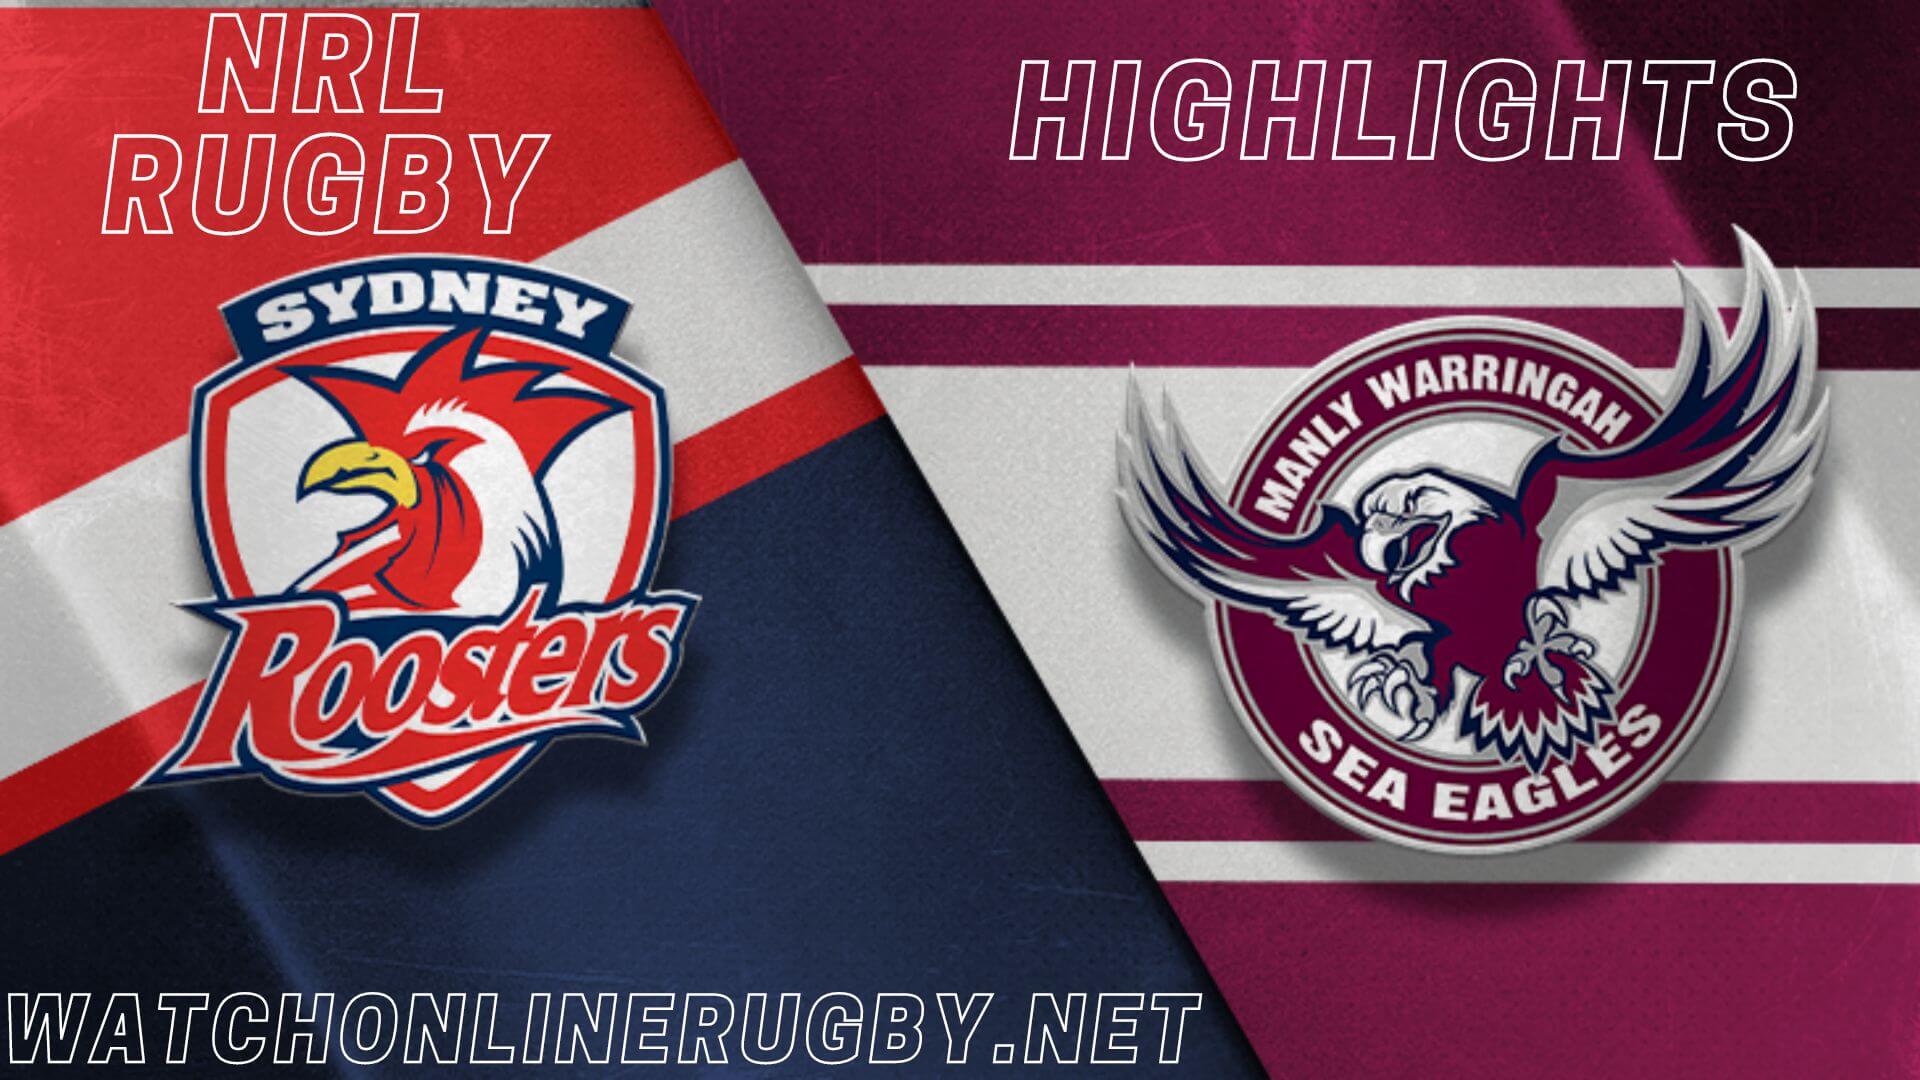 Sea Eagles Vs Roosters Highlights RD 20 NRL Rugby